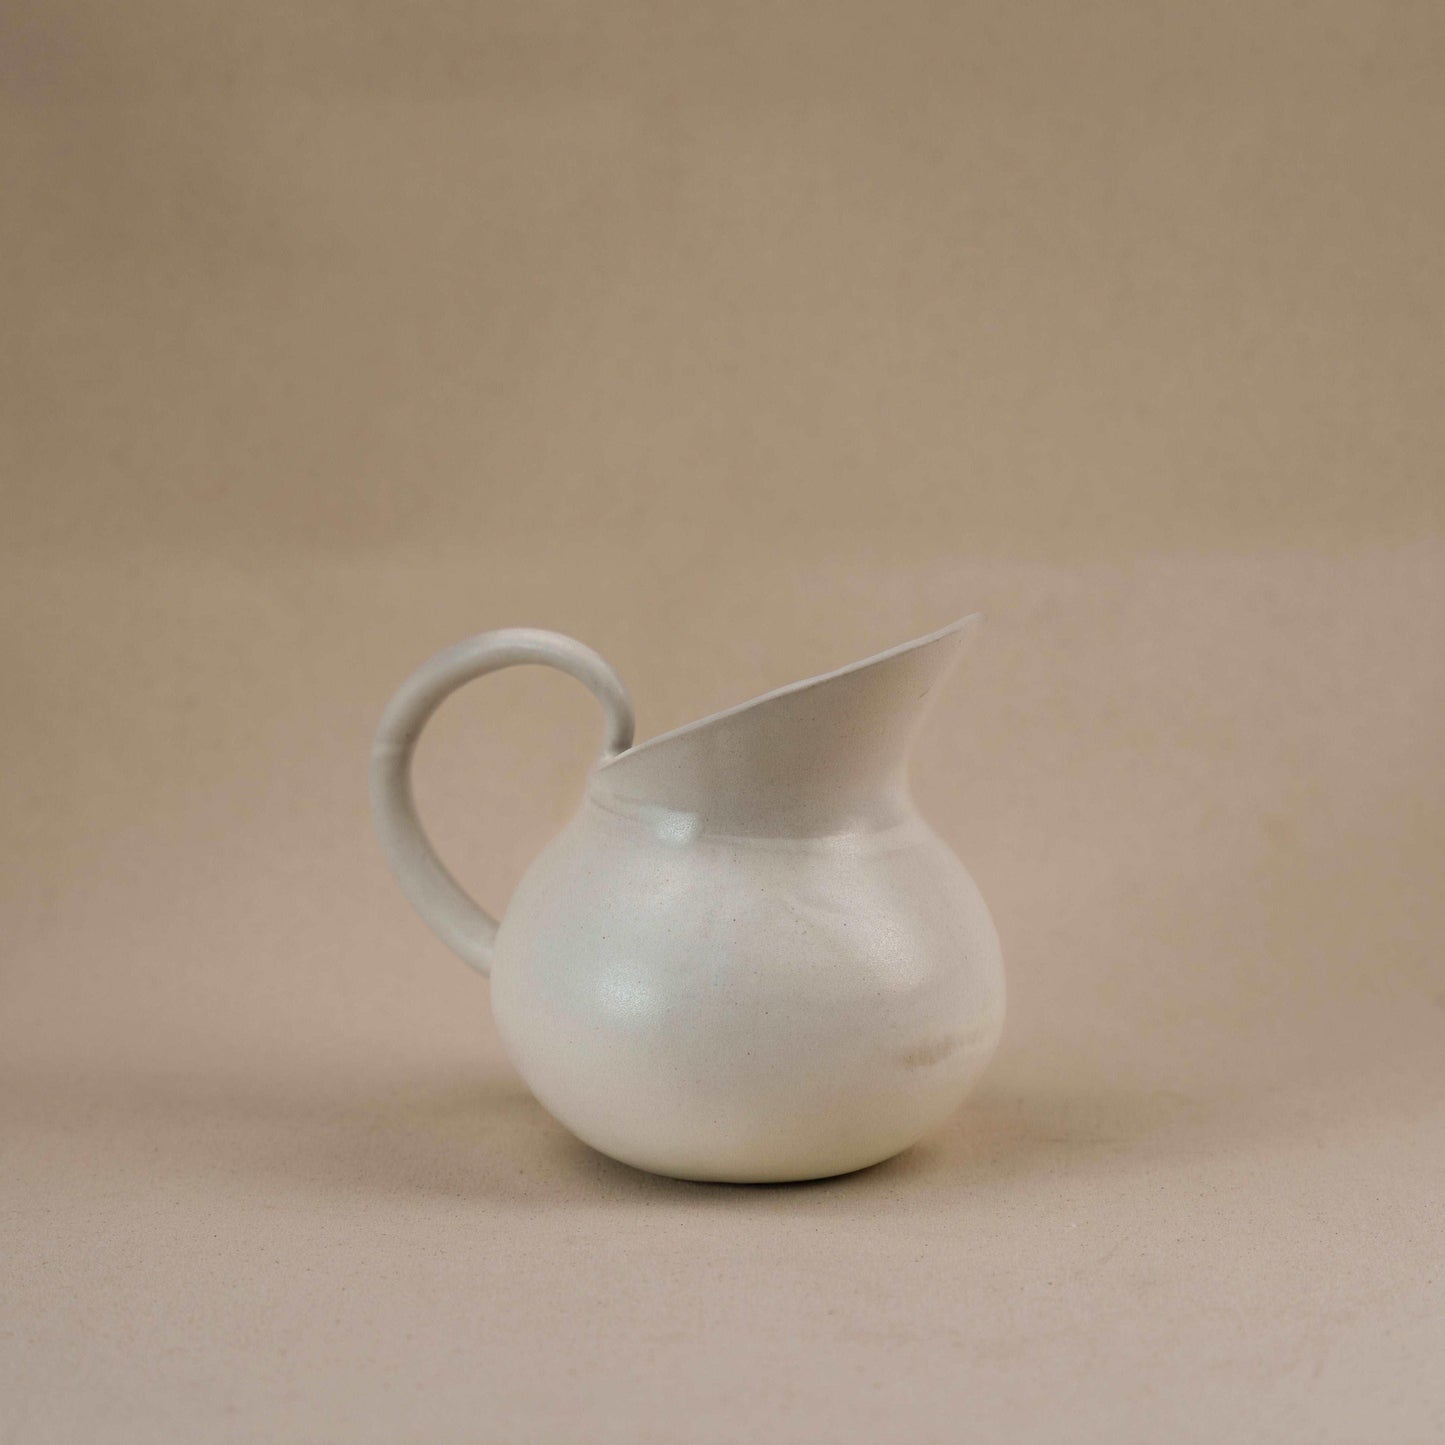 Ceramic Pitcher, Matte White  -  For Beer / Juice / Tea / Coffee